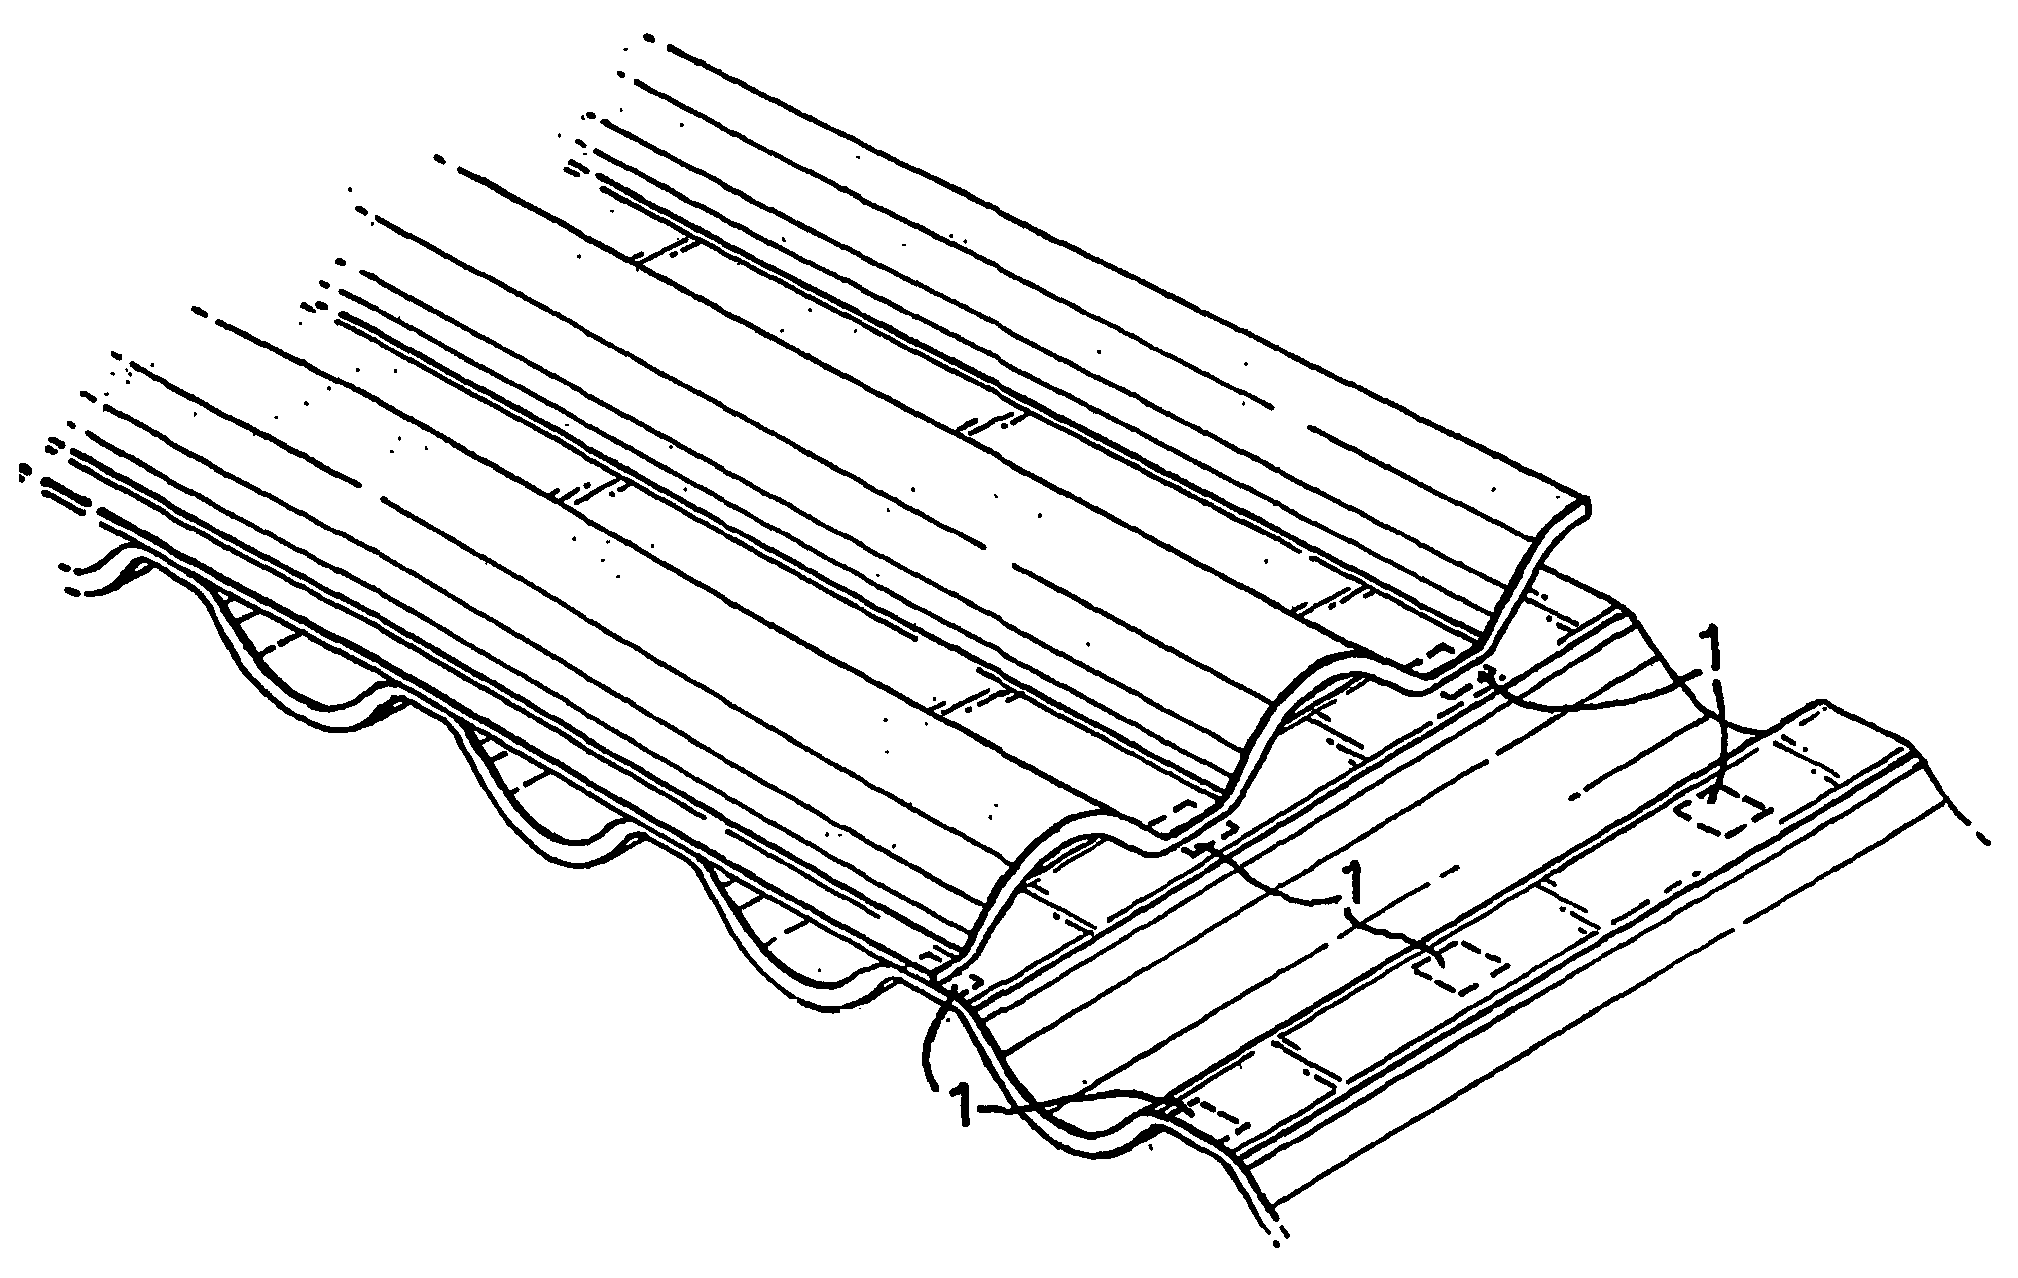 Laminates of films having improved resistance to bending in all directions and methods and apparatus for their manufacture